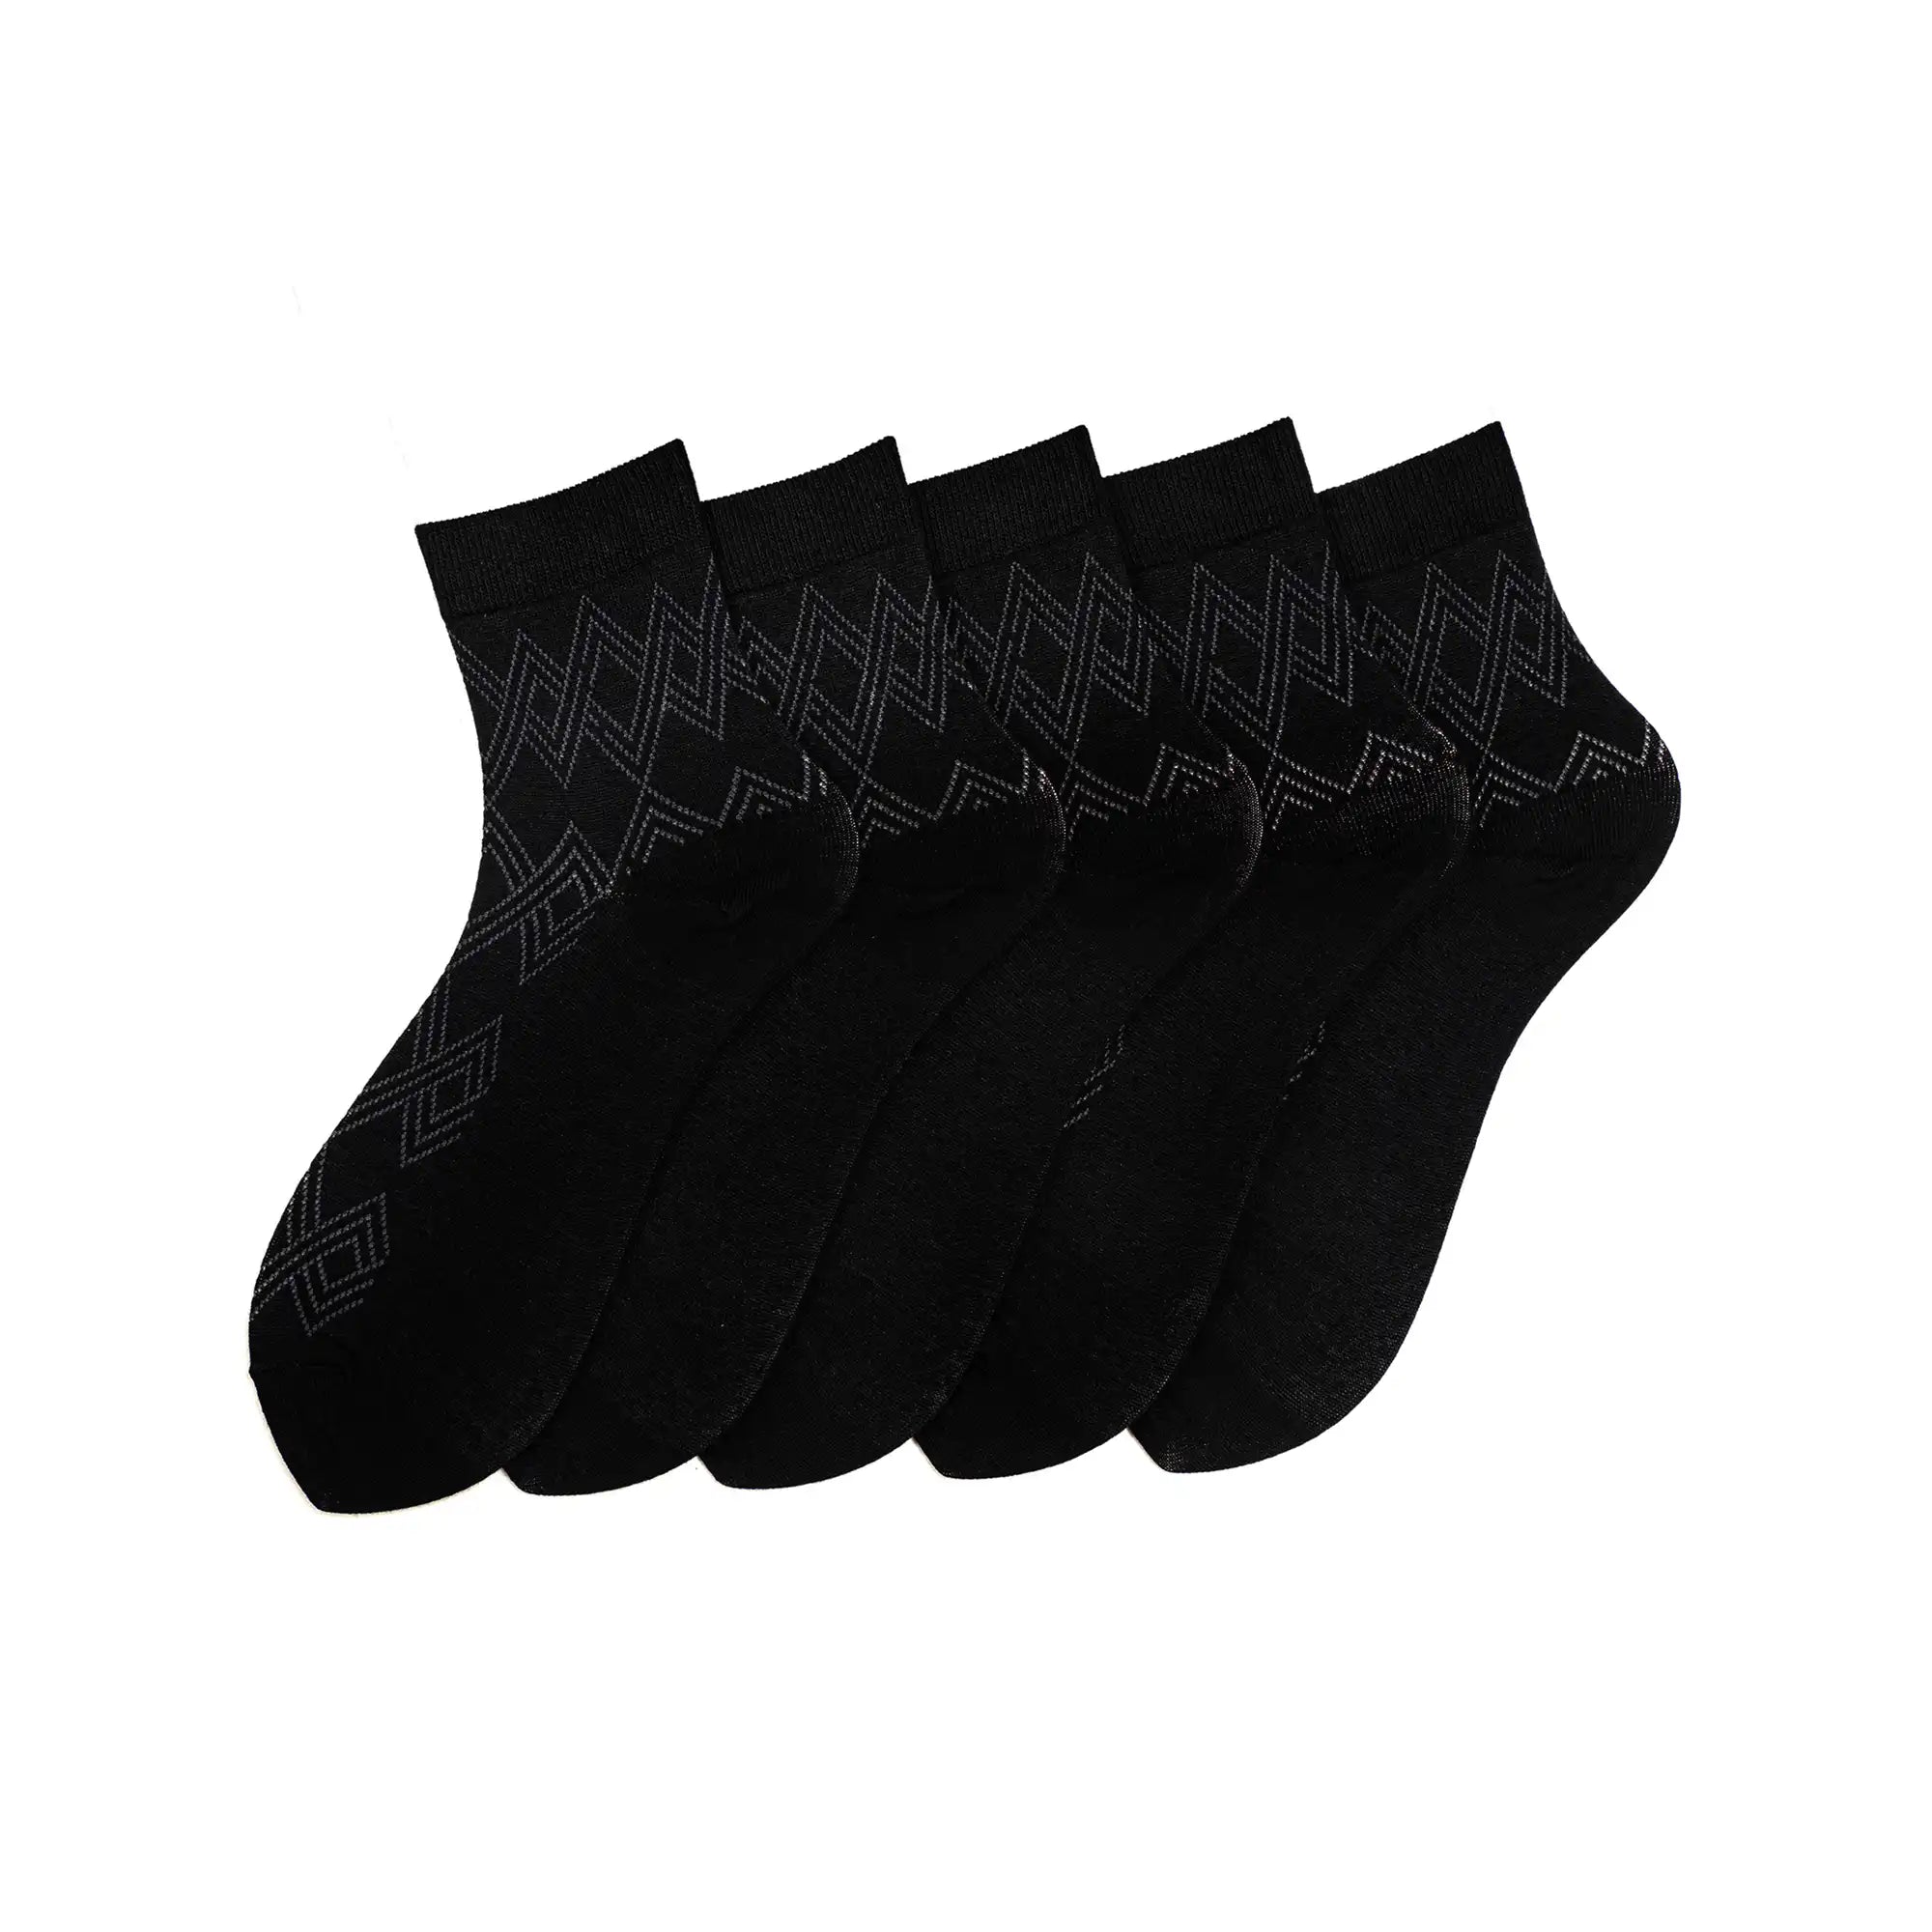 Young Wings Men's Black Colour Cotton Fabric Solid Ankle Length Socks - Pack of 5, Style no. 2304-M1